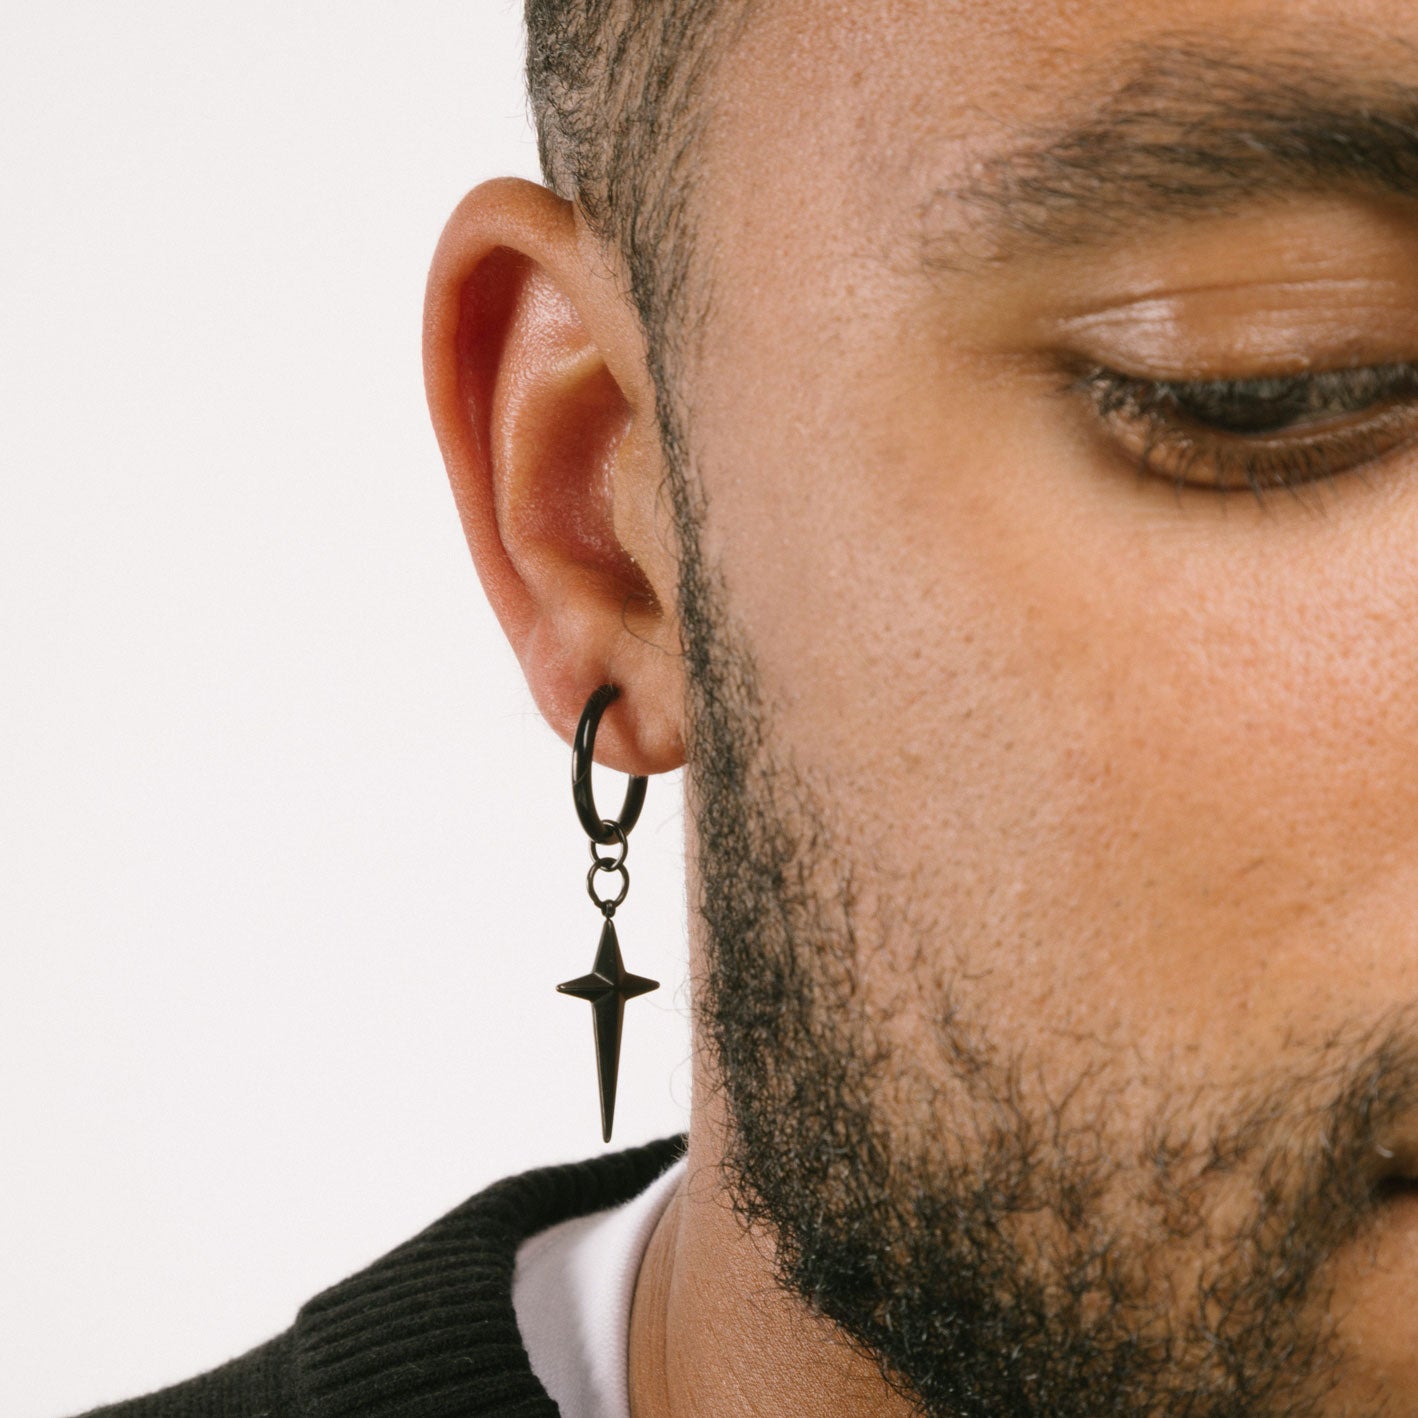 A model wearing the Altair Clip On Earrings offer a secure and adjustable closure that are perfect for those with thin ear lobes. Crafted with stainless steel and featuring non-tarnish and water-resistant properties, these earrings are hypoallergenic, lead and nickel free. The average comfortable wear duration is 2 to 4 hours. The item is sold as one pair.